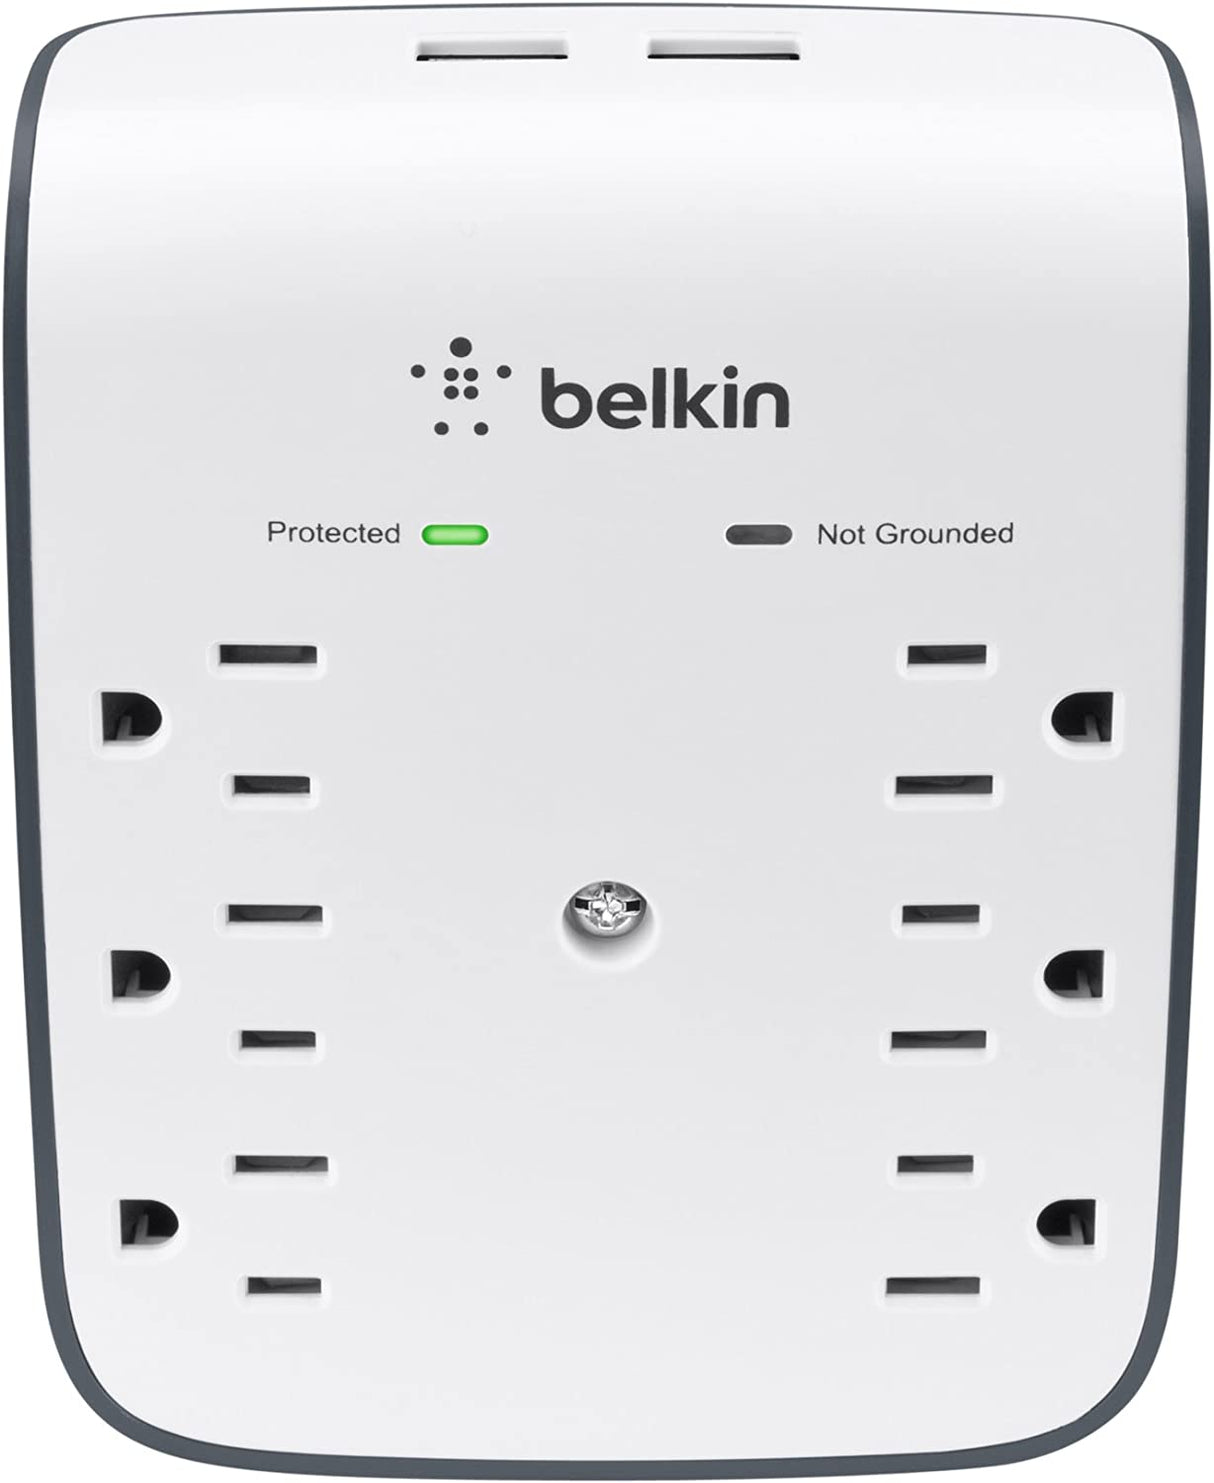 Belkin 6-Outlet USB Surge Protector, Wall Mount - Ideal for Mobile Devices, Personal Electronics, Small Appliances and More (900 Joules) Wall Mount 6-Outlet with USB Power Strip